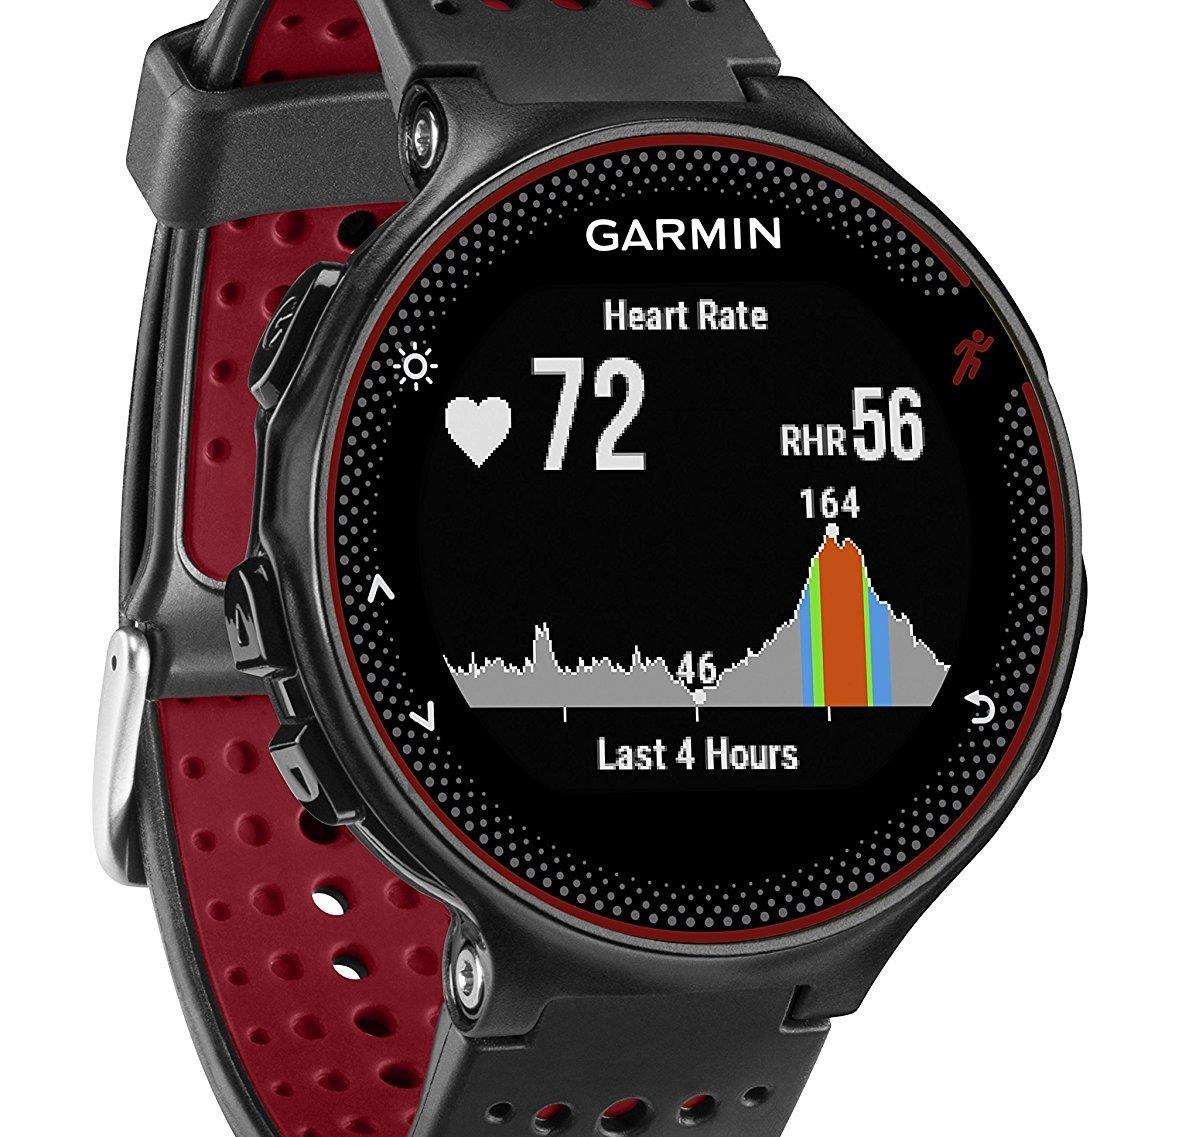 Smart watches from Garmin and Huawei are currently hot property on Amazon